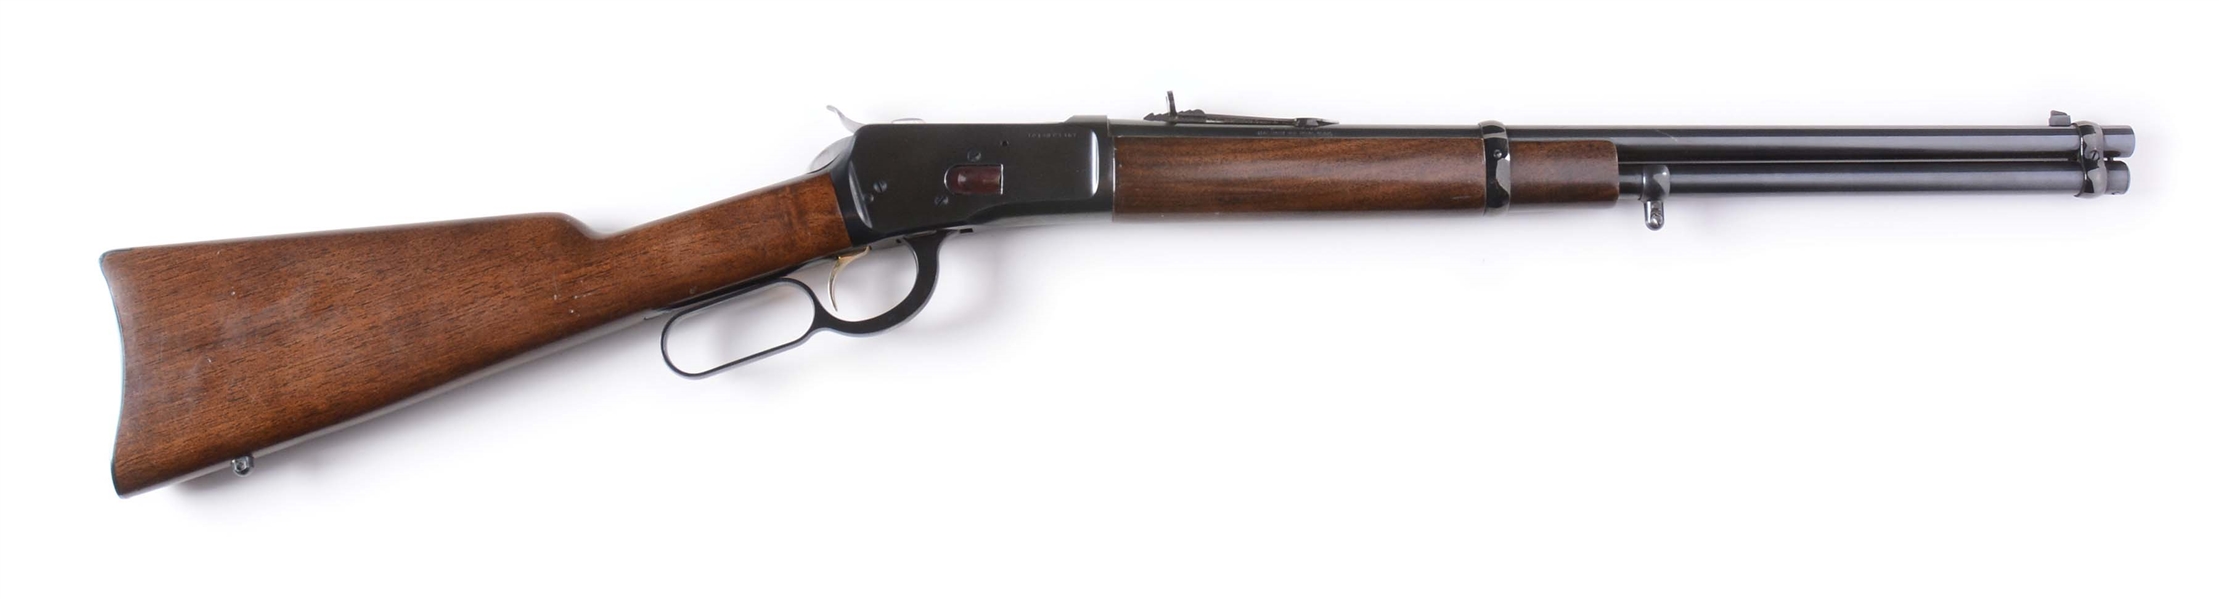 (M) BROWNING MODEL 92 LEVER ACTION CARBINE.